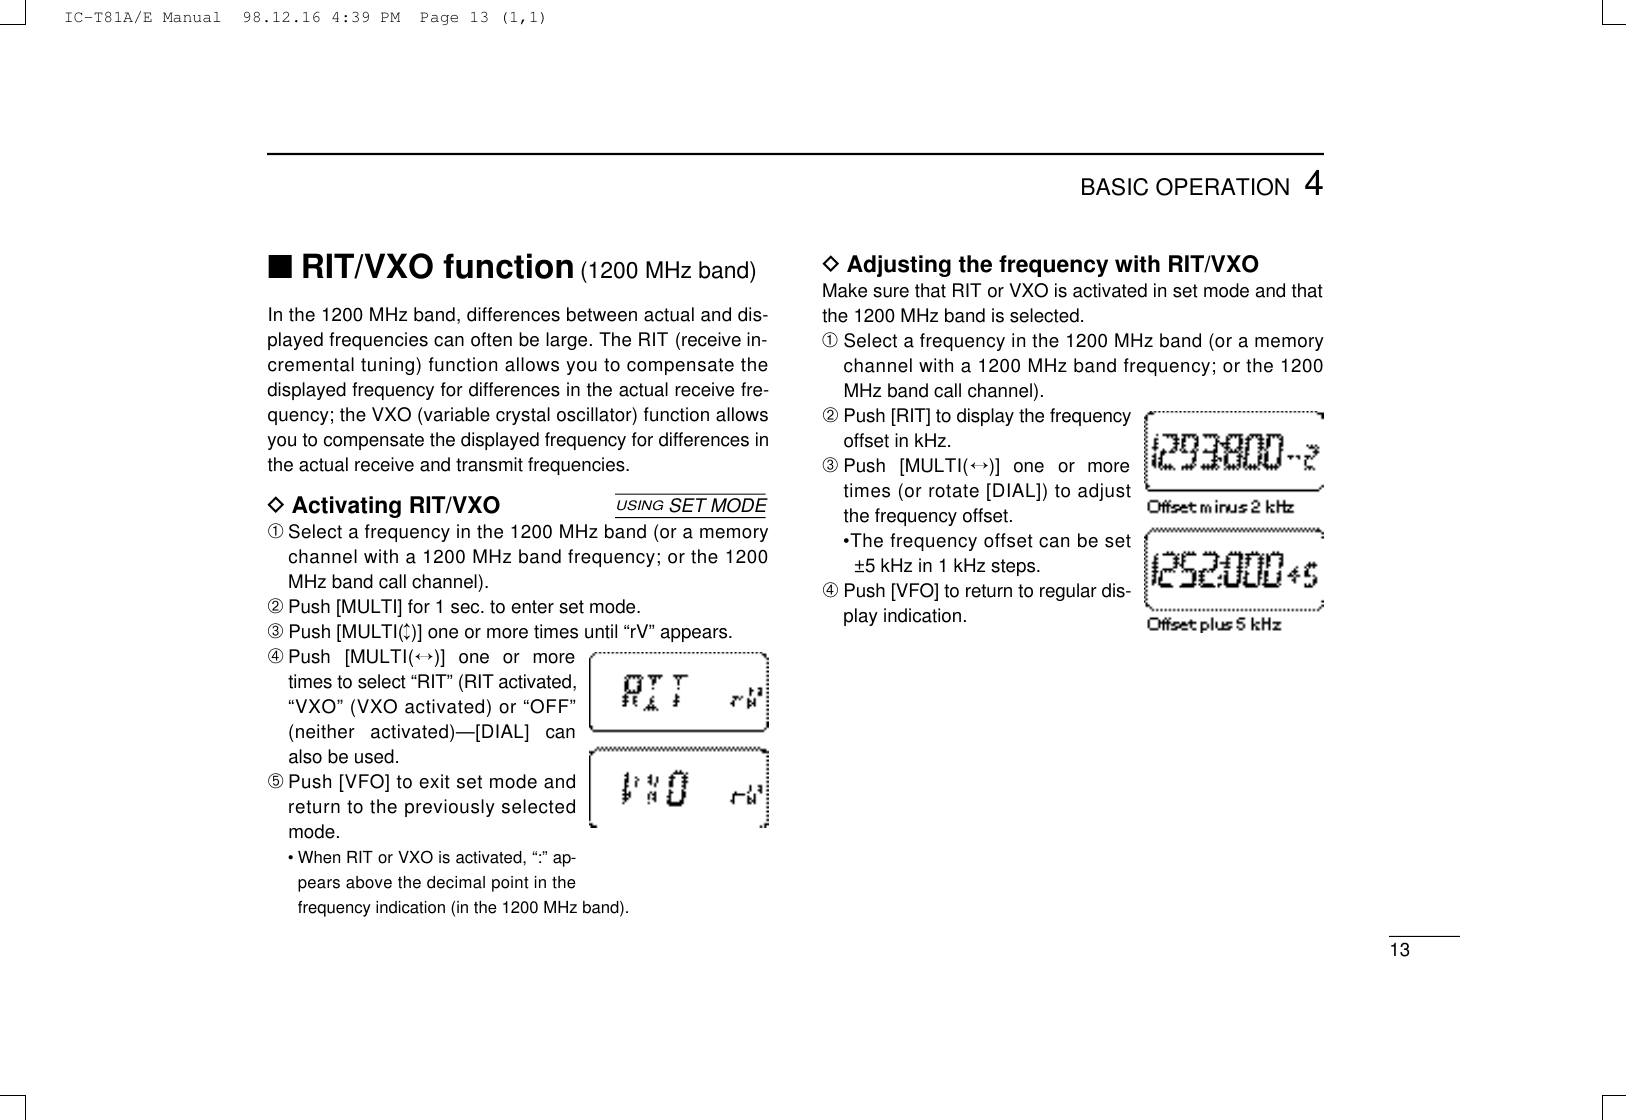 134BASIC OPERATION■RIT/VXO function(1200 MHz band)In the 1200 MHz band, differences between actual and dis-played frequencies can often be large. The RIT (receive in-cremental tuning) function allows you to compensate thedisplayed frequency for differences in the actual receive fre-quency; the VXO (variable crystal oscillator) function allowsyou to compensate the displayed frequency for differences inthe actual receive and transmit frequencies.DActivating RIT/VXO➀Select a frequency in the 1200 MHz band (or a memorychannel with a 1200 MHz band frequency; or the 1200MHz band call channel).➁Push [MULTI] for 1 sec. to enter set mode.➂Push [MULTI(↕)] one or more times until “rV” appears.➃Push  [MULT I (↔)]  one  or  moretimes to select “RIT” (RIT a c t i v a t e d ,“VXO” (VXO activated) or “OFF”(neither  activated)—[DIAL]  canalso be used.➄Push [VFO] to exit set mode andreturn to the previously selectedmode.• When RIT or VXO is activated, “:” ap-pears above the decimal point in thefrequency indication (in the 1200 MHz band).USINGSET MODEDAdjusting the frequency with RIT/VXOMake sure that RIT or VXO is activated in set mode and thatthe 1200 MHz band is selected.➀Select a frequency in the 1200 MHz band (or a memorychannel with a 1200 MHz band frequency; or the 1200MHz band call channel).➁Push [RIT] to display the frequencyoffset in kHz.➂Push  [MULT I (↔)]  one  or  moretimes (or rotate [DIAL]) to adjustthe frequency offset.•The frequency offset can be set±5 kHz in 1 kHz steps.➃Push [VFO] to return to regular dis-play indication.IC-T81A/E Manual  98.12.16 4:39 PM  Page 13 (1,1)